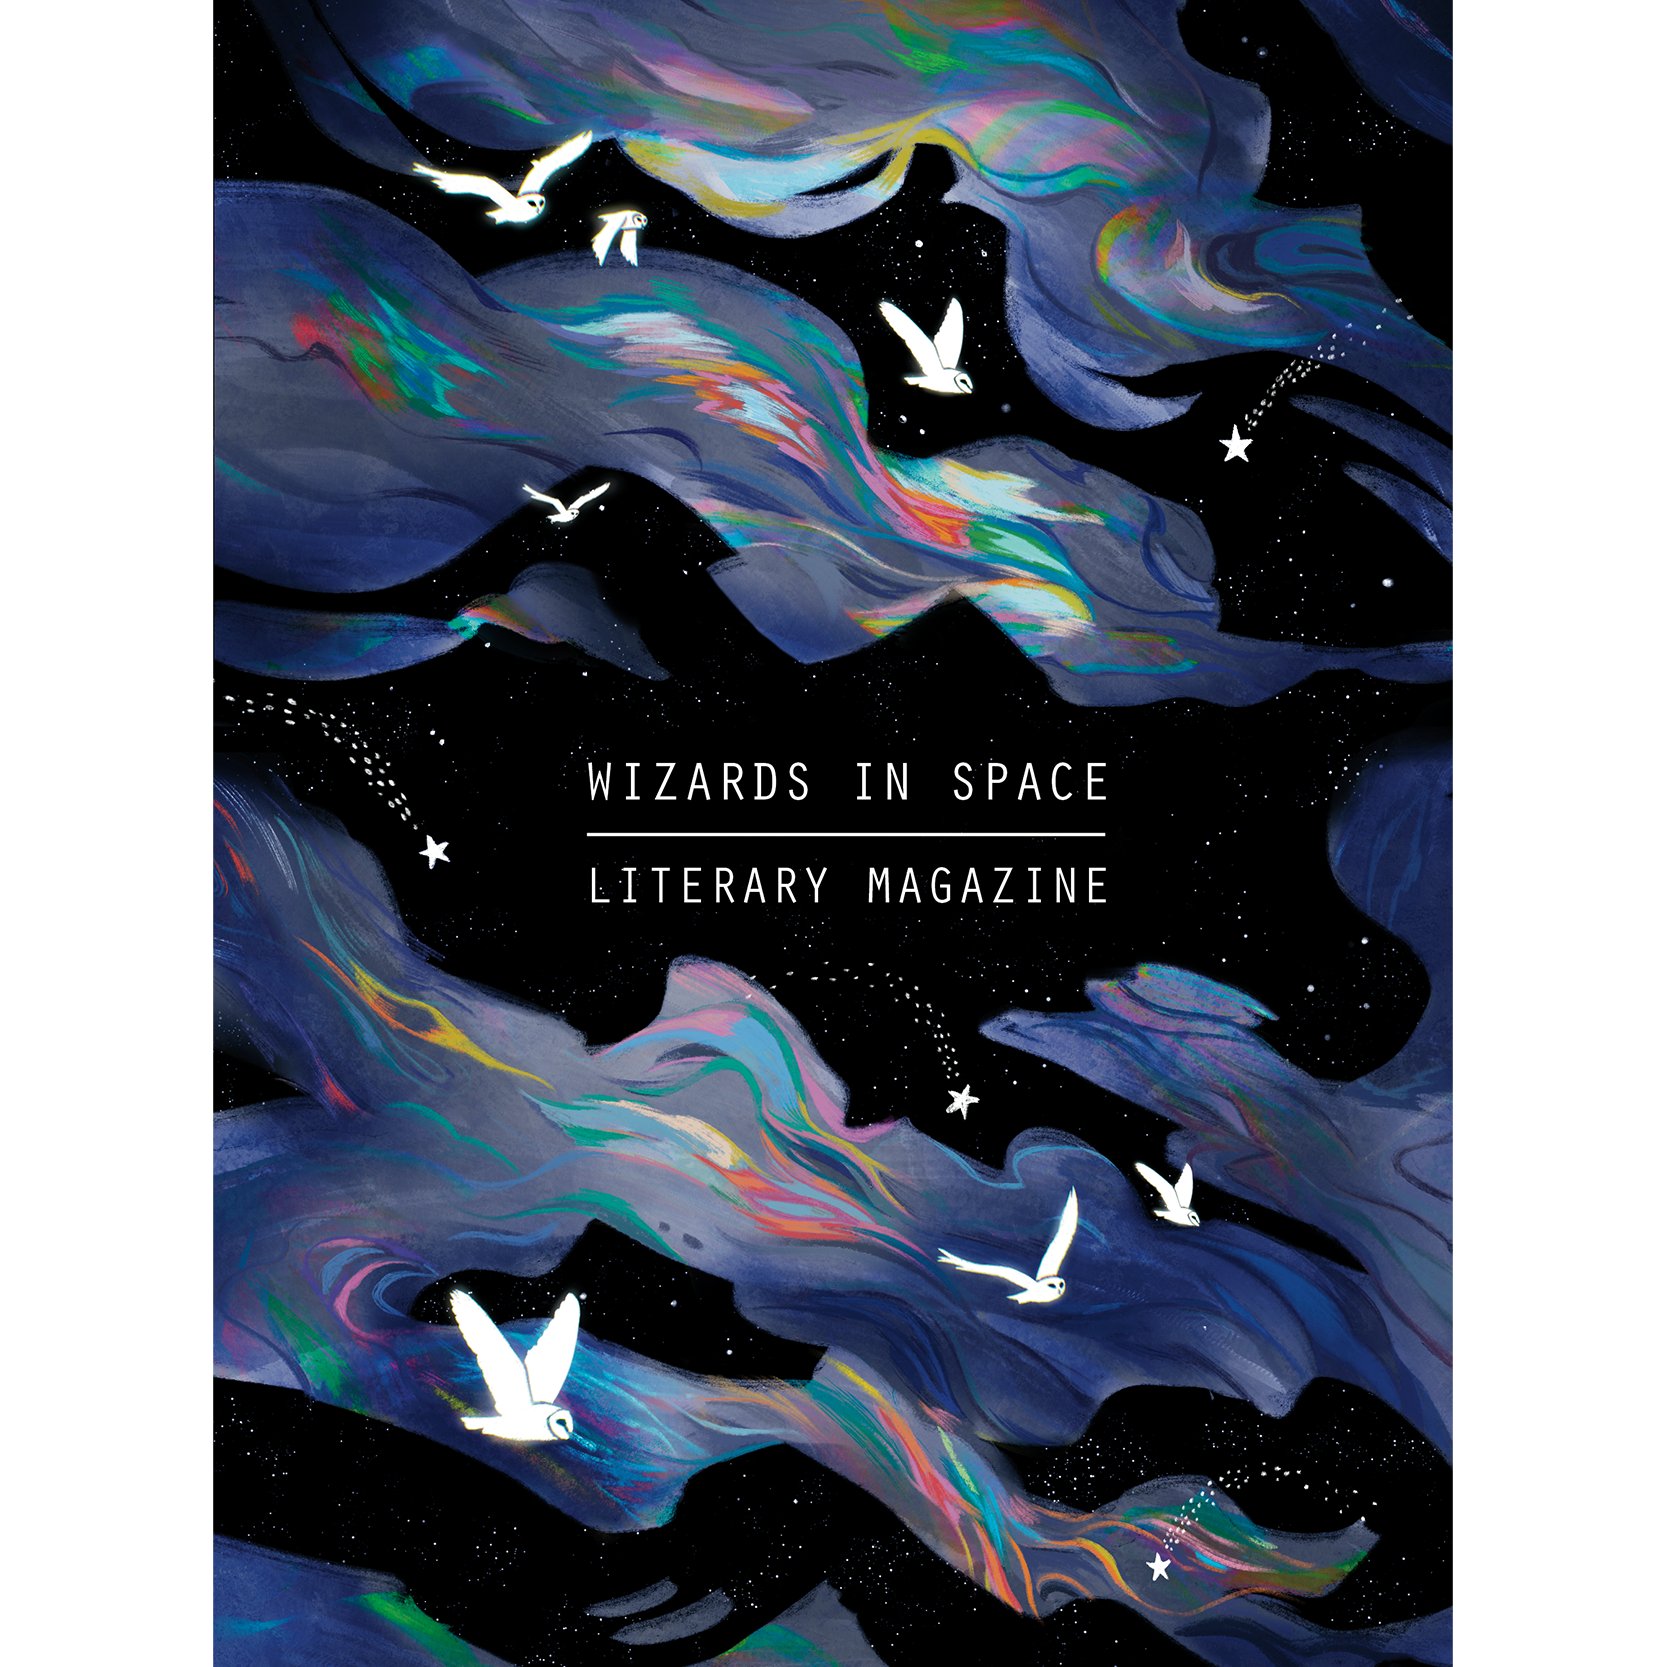 Wizards in Space issue 09 cover, featuring white birds flying through an aurora borealis